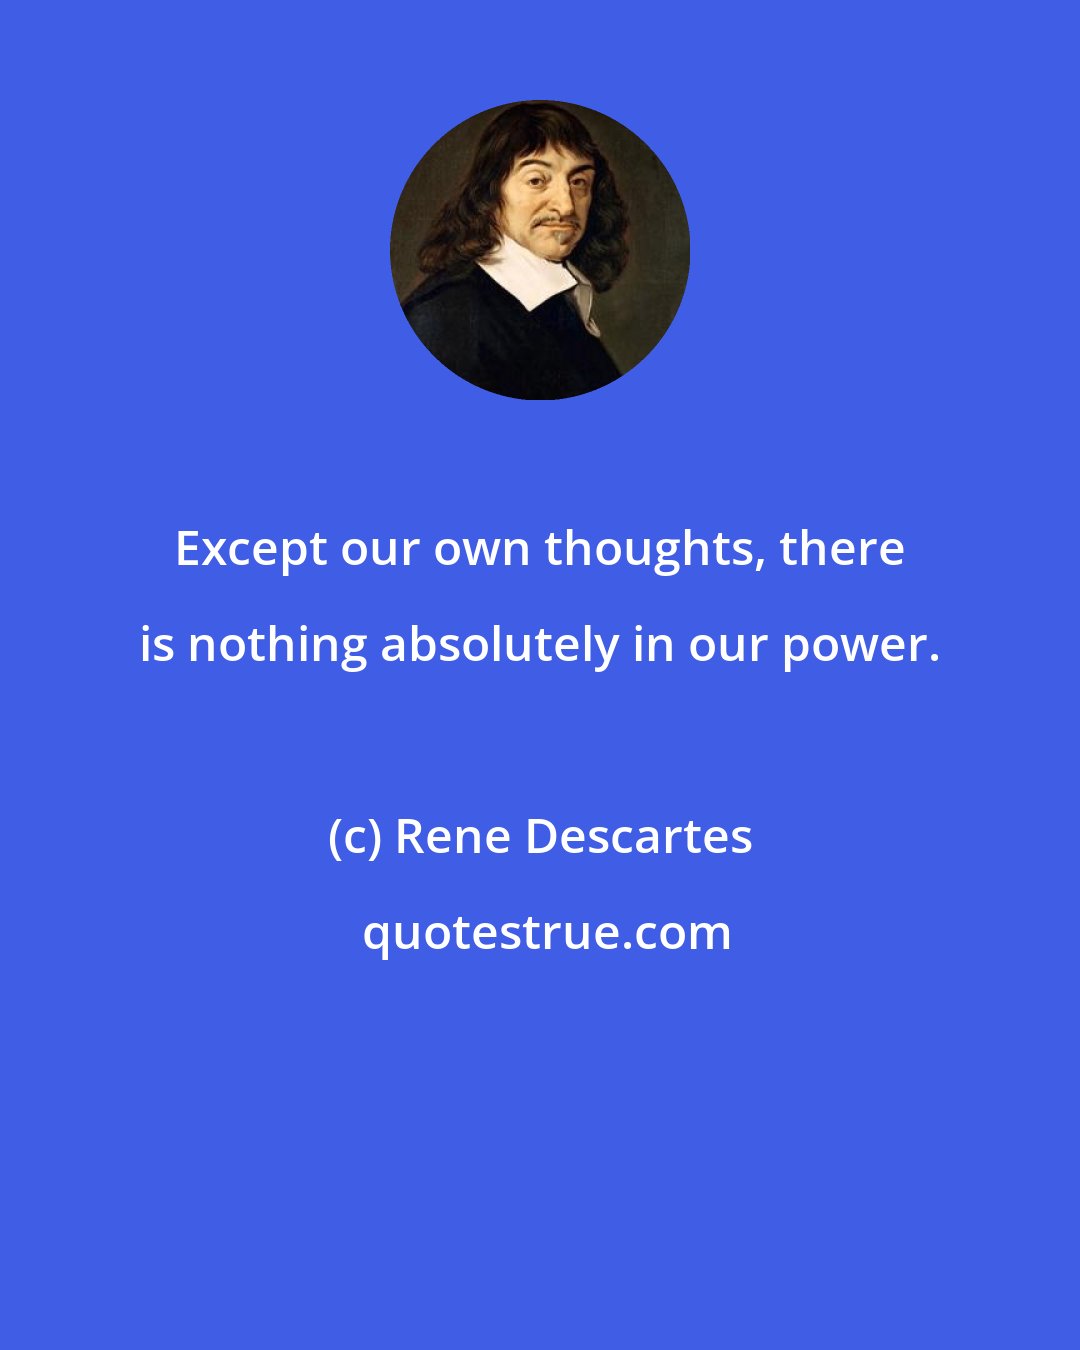 Rene Descartes: Except our own thoughts, there is nothing absolutely in our power.